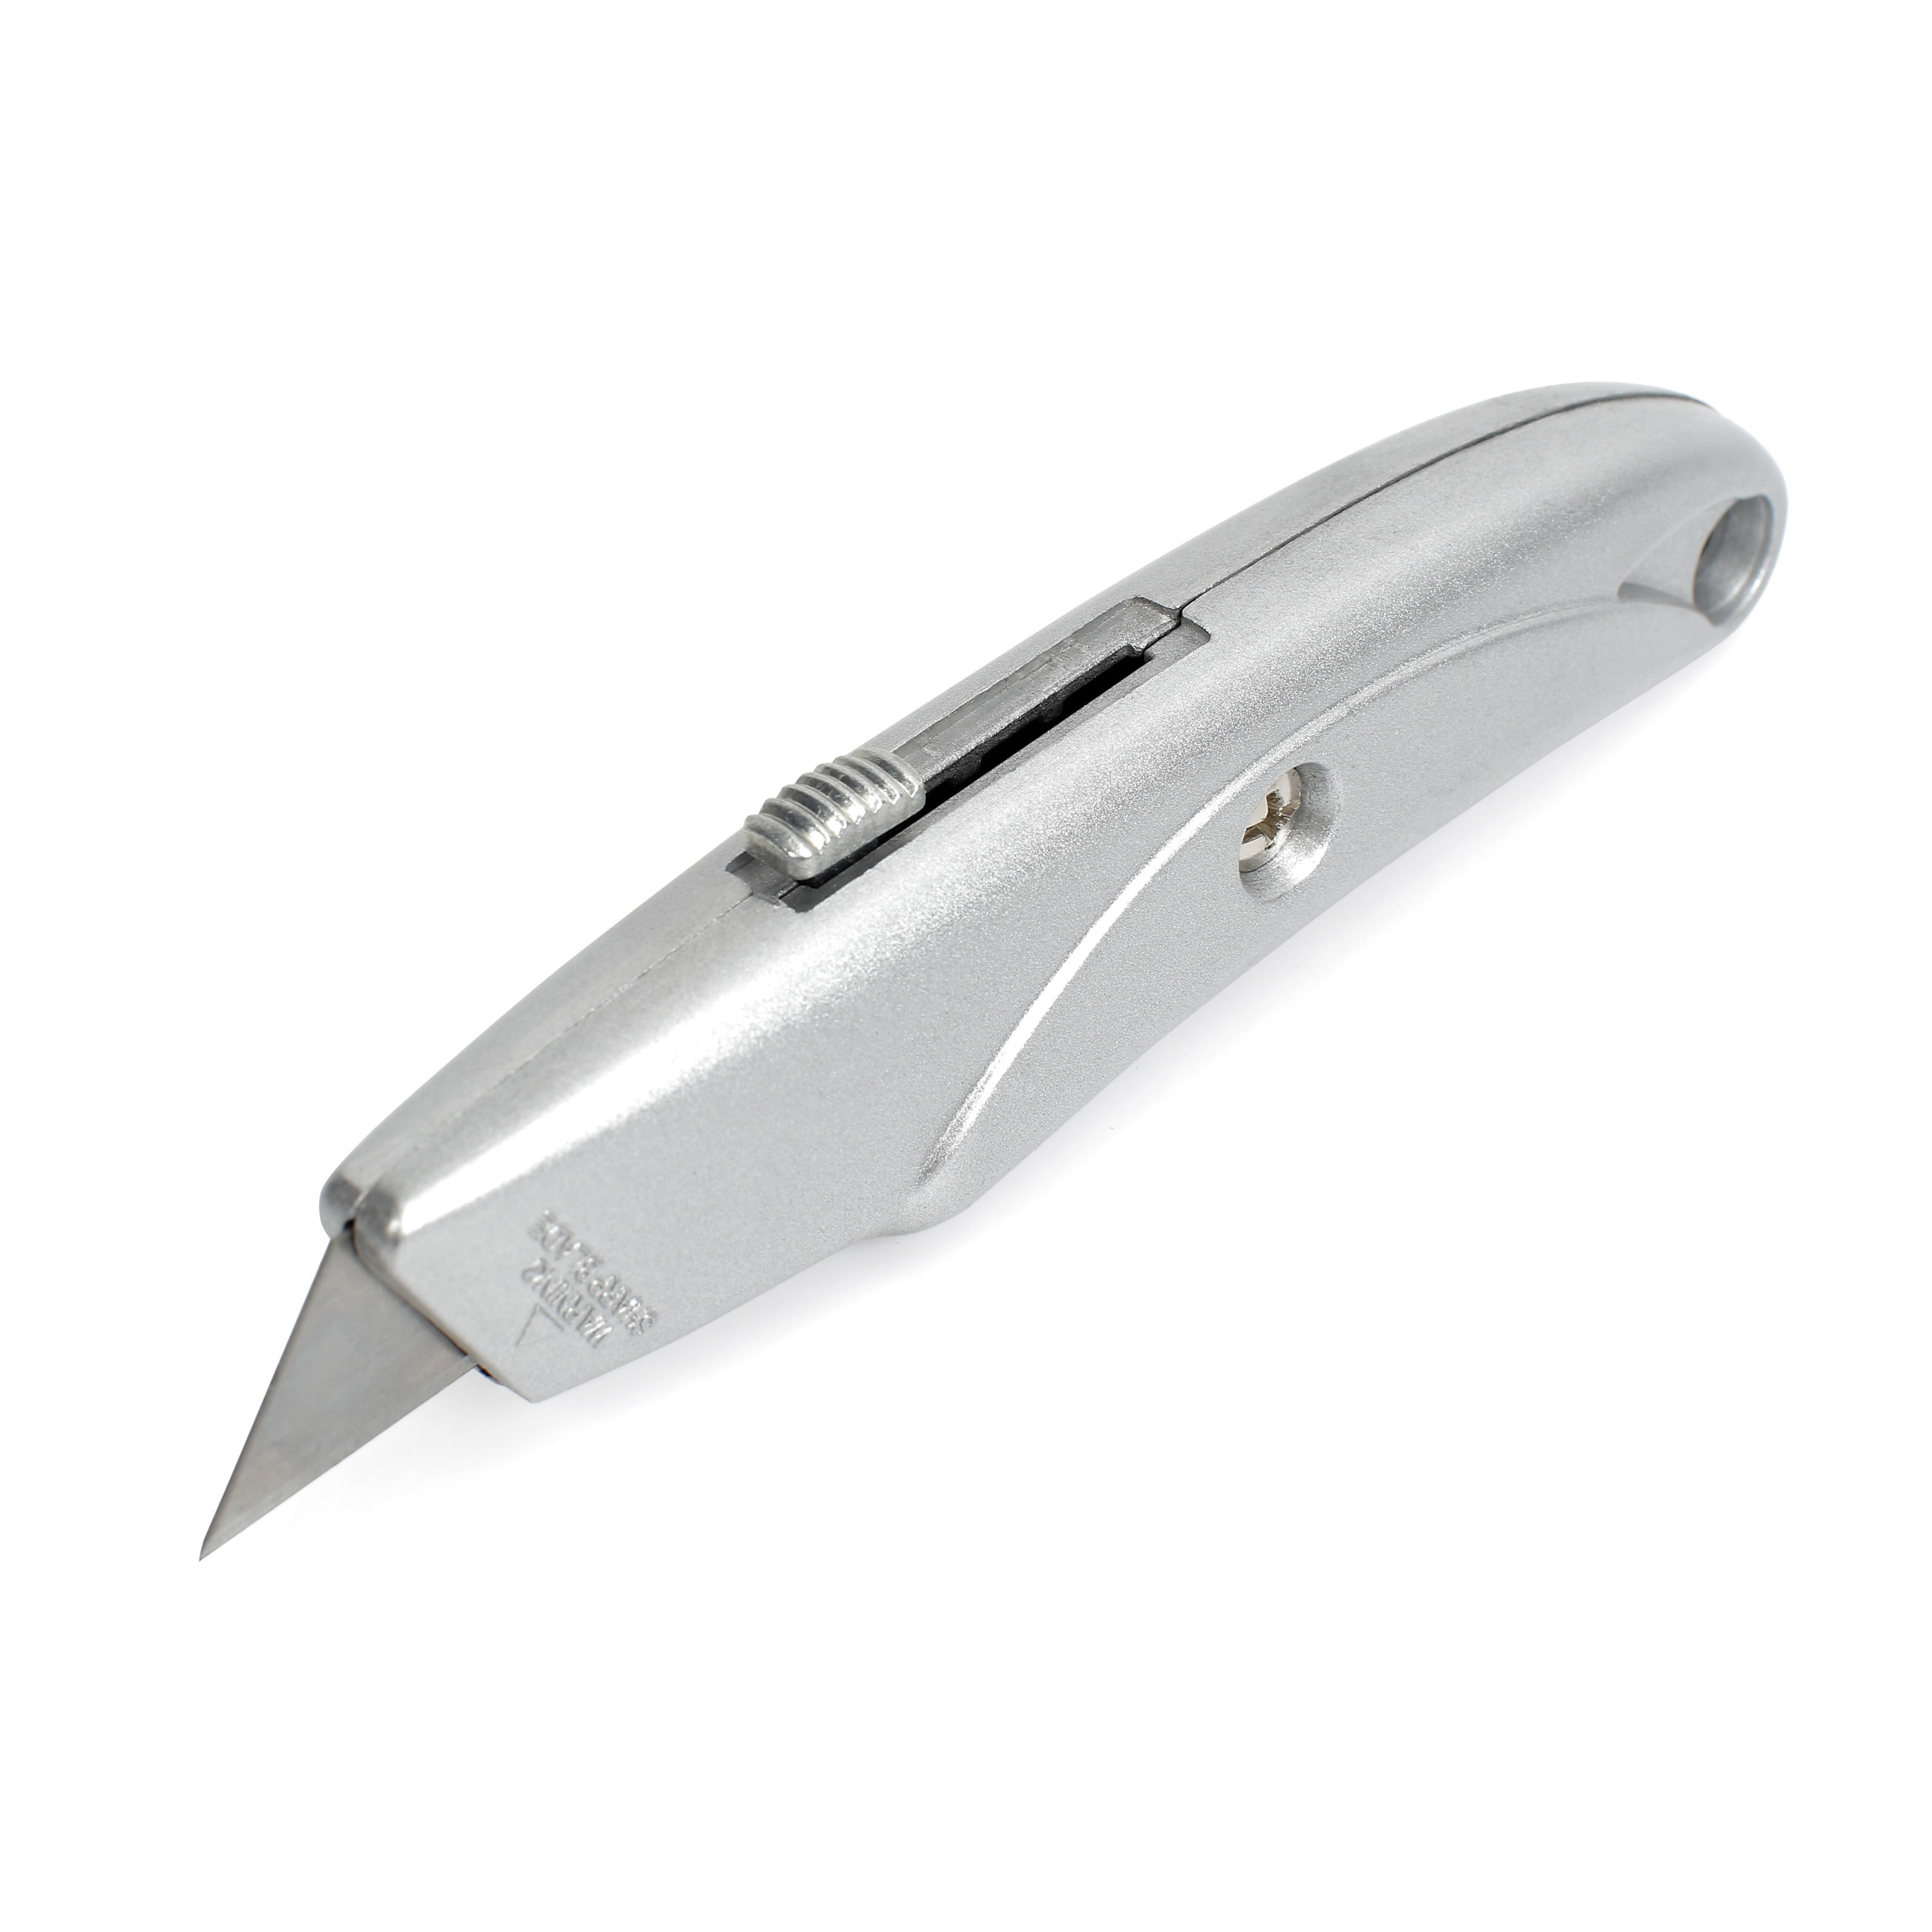 Hyper Tough Retractable Utility Knife with Blade Storage, Model 6832